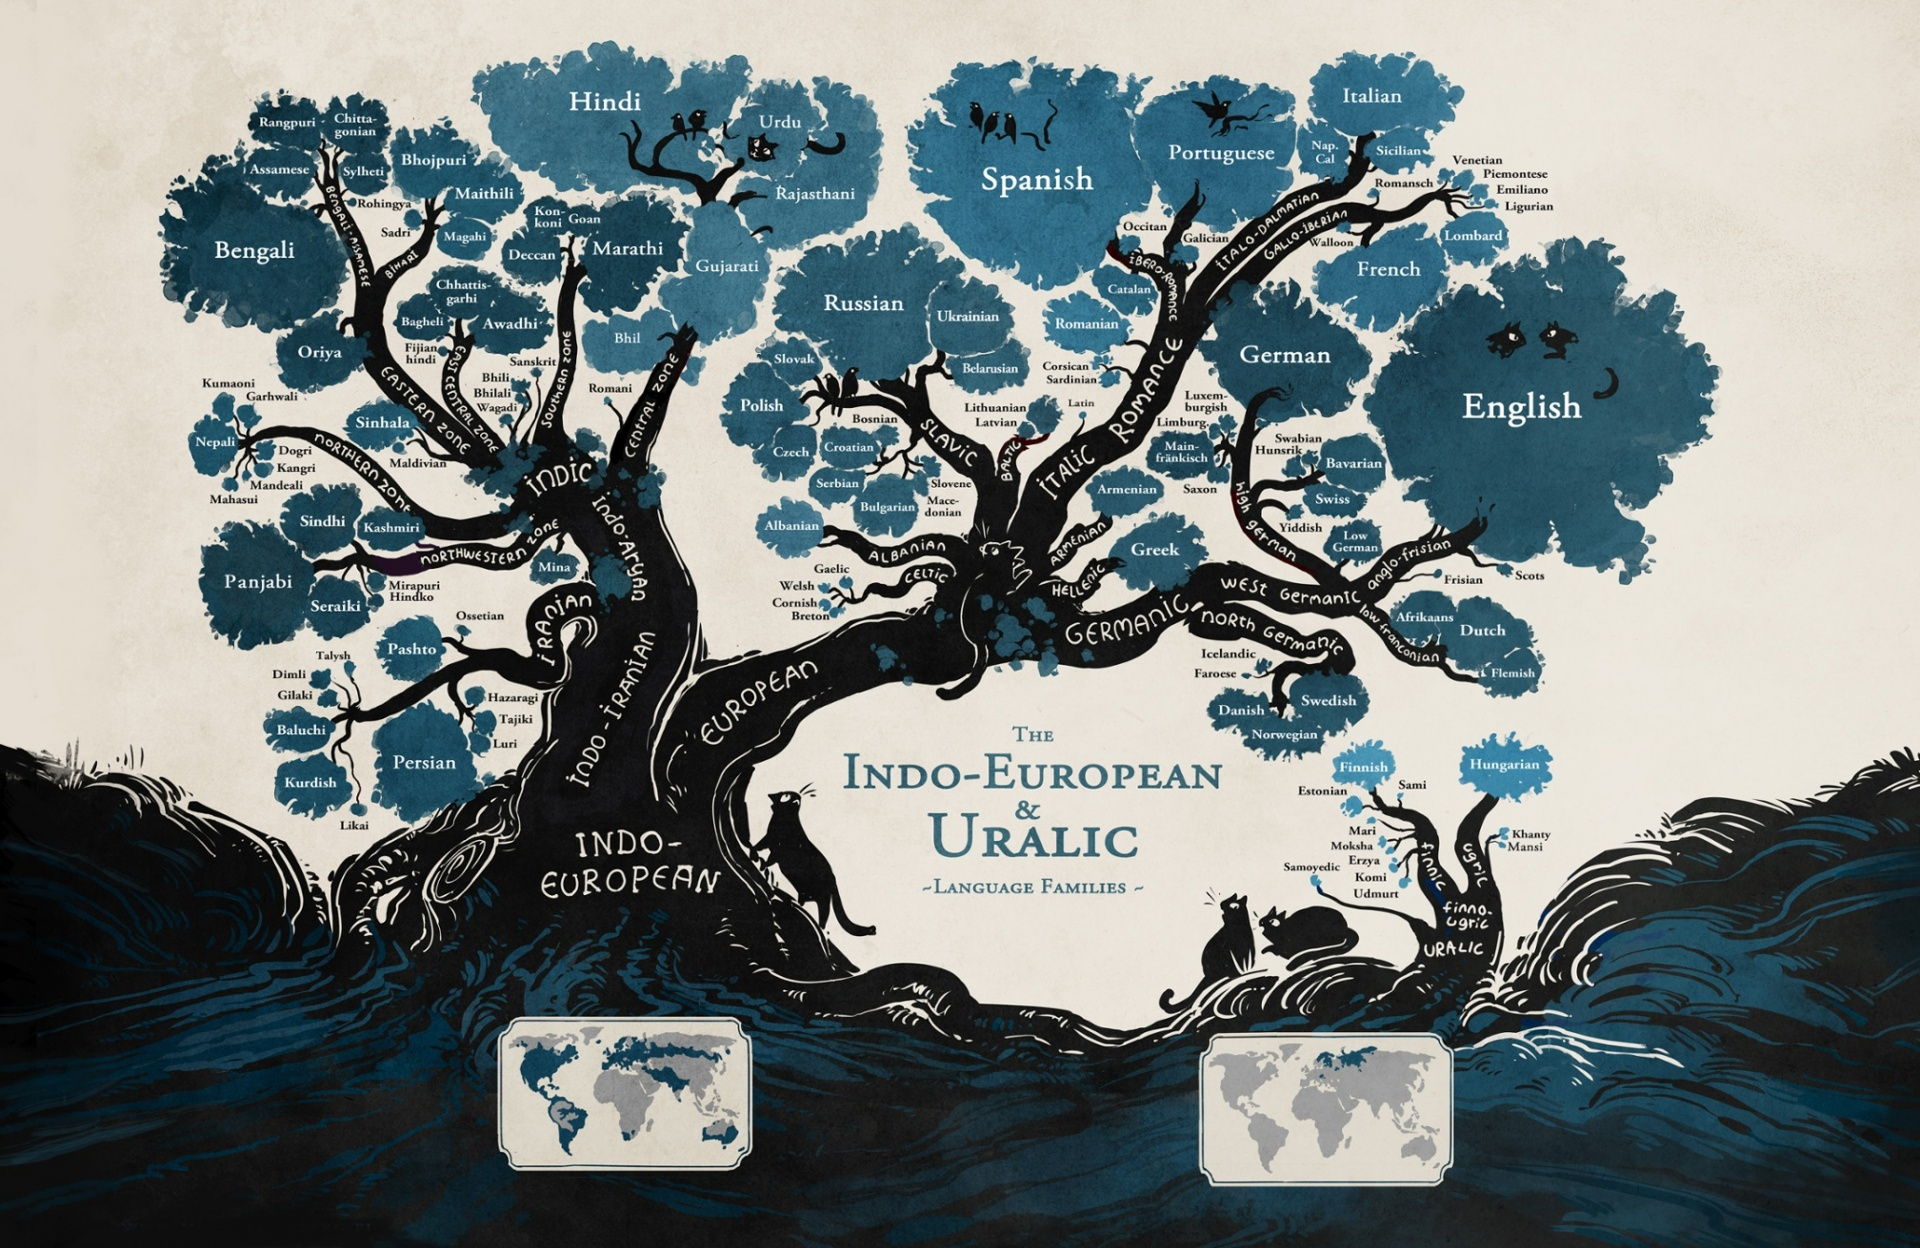 An illustration of the Indo-European and Uralic language trees